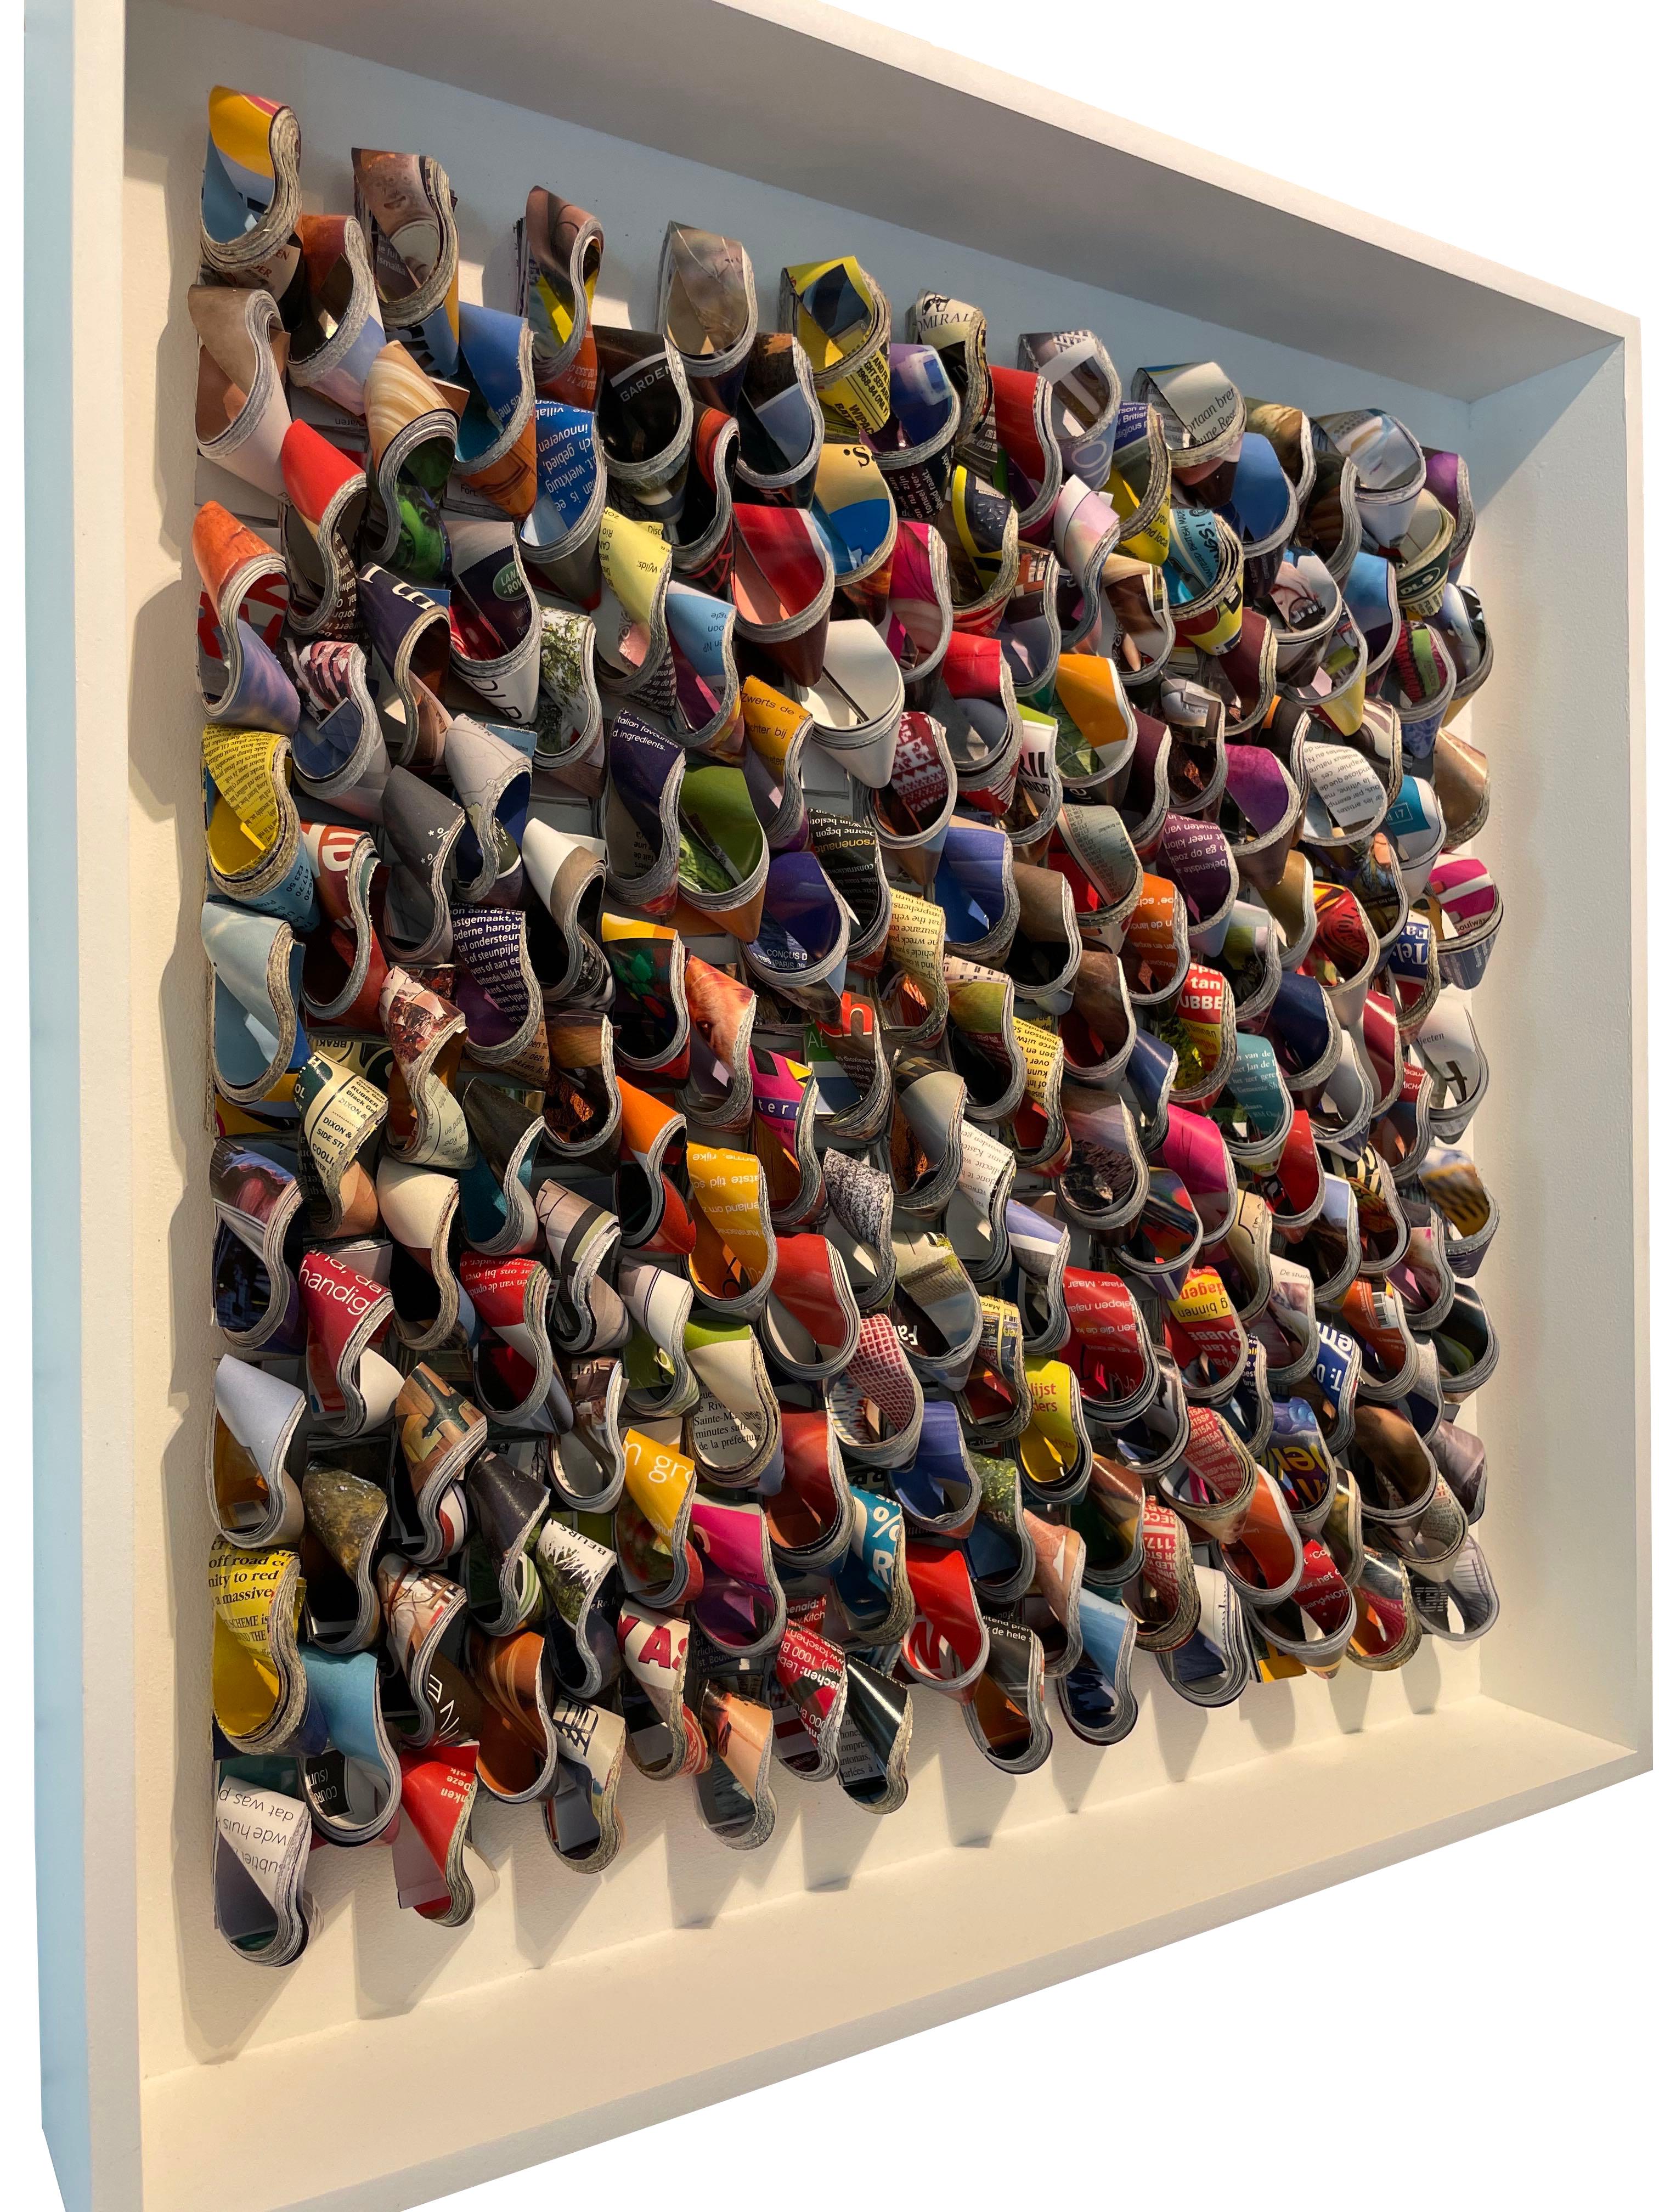 Contemporary Belgian artist Guy Leclef wall sculpture.
Cut pieces of brightly colored hand folded pages from various international magazines folded and placed to create
a unique and dramatic wall sculpture.
Folded paper housed in a thick lucite